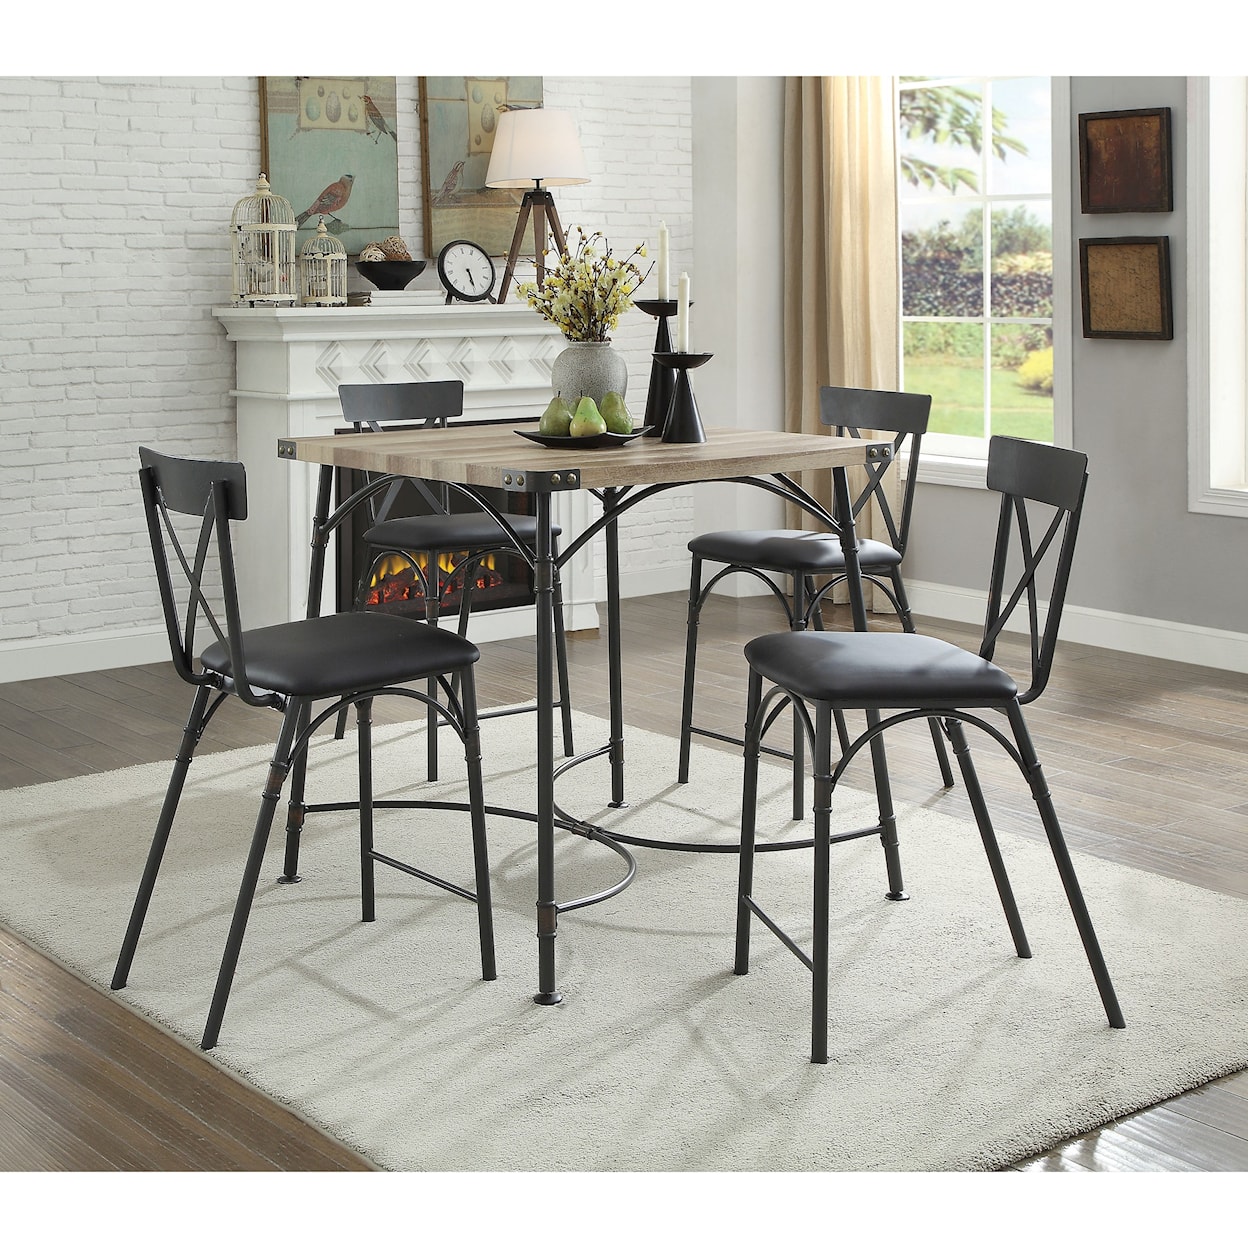 Acme Furniture Itzel Counter Height Dining Set with 4 Chairs